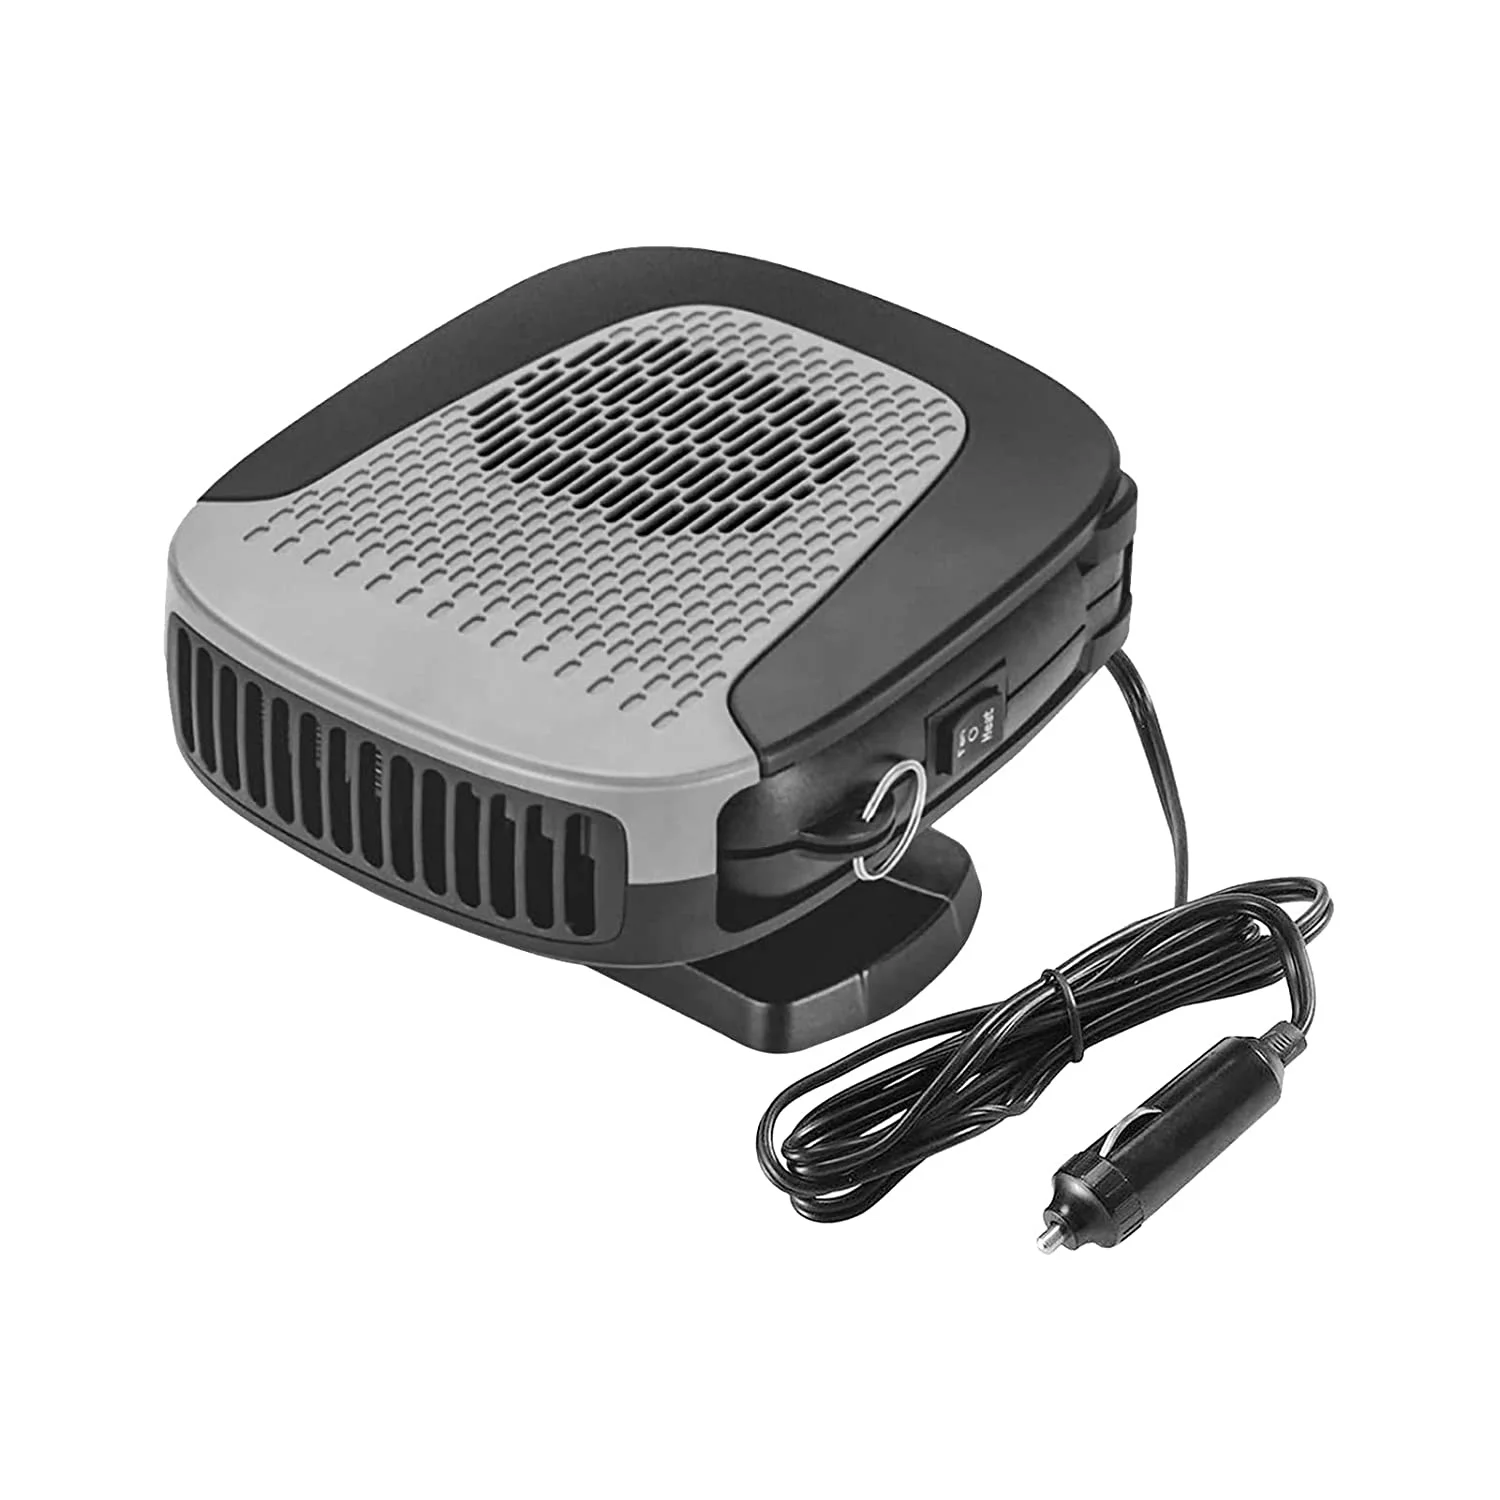 Gray Car Heater 2 in 1 Heating/Cooling Function Portable Auto Electronic Heater Fan Fast Heating Defrost 12V 150W Car Defrost Defogger 